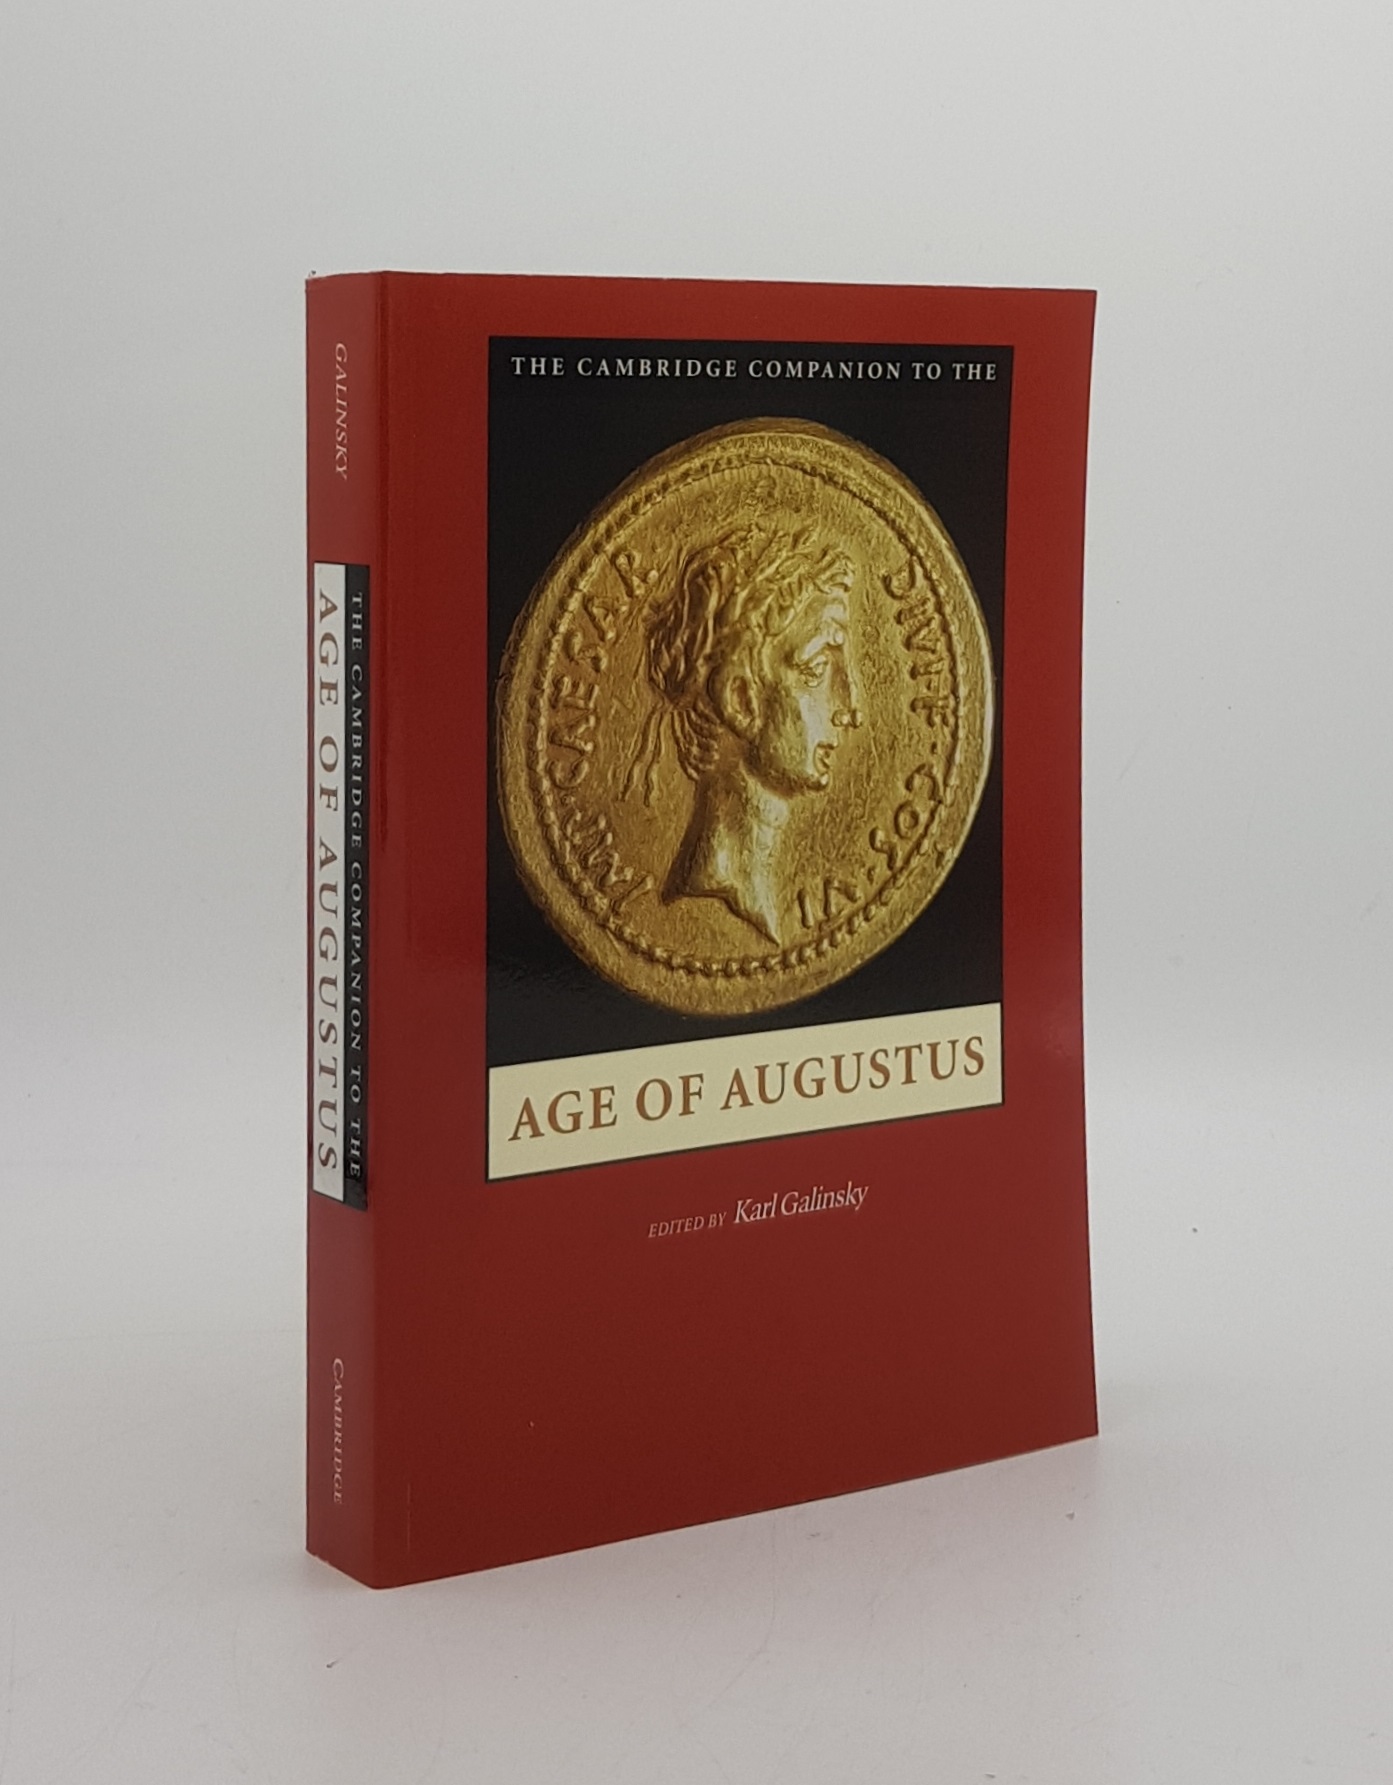 THE CAMBRIDGE COMPANION TO THE AGE OF AUGUSTUS (Cambridge Companions to the Ancient World) - GALINSKY Karl